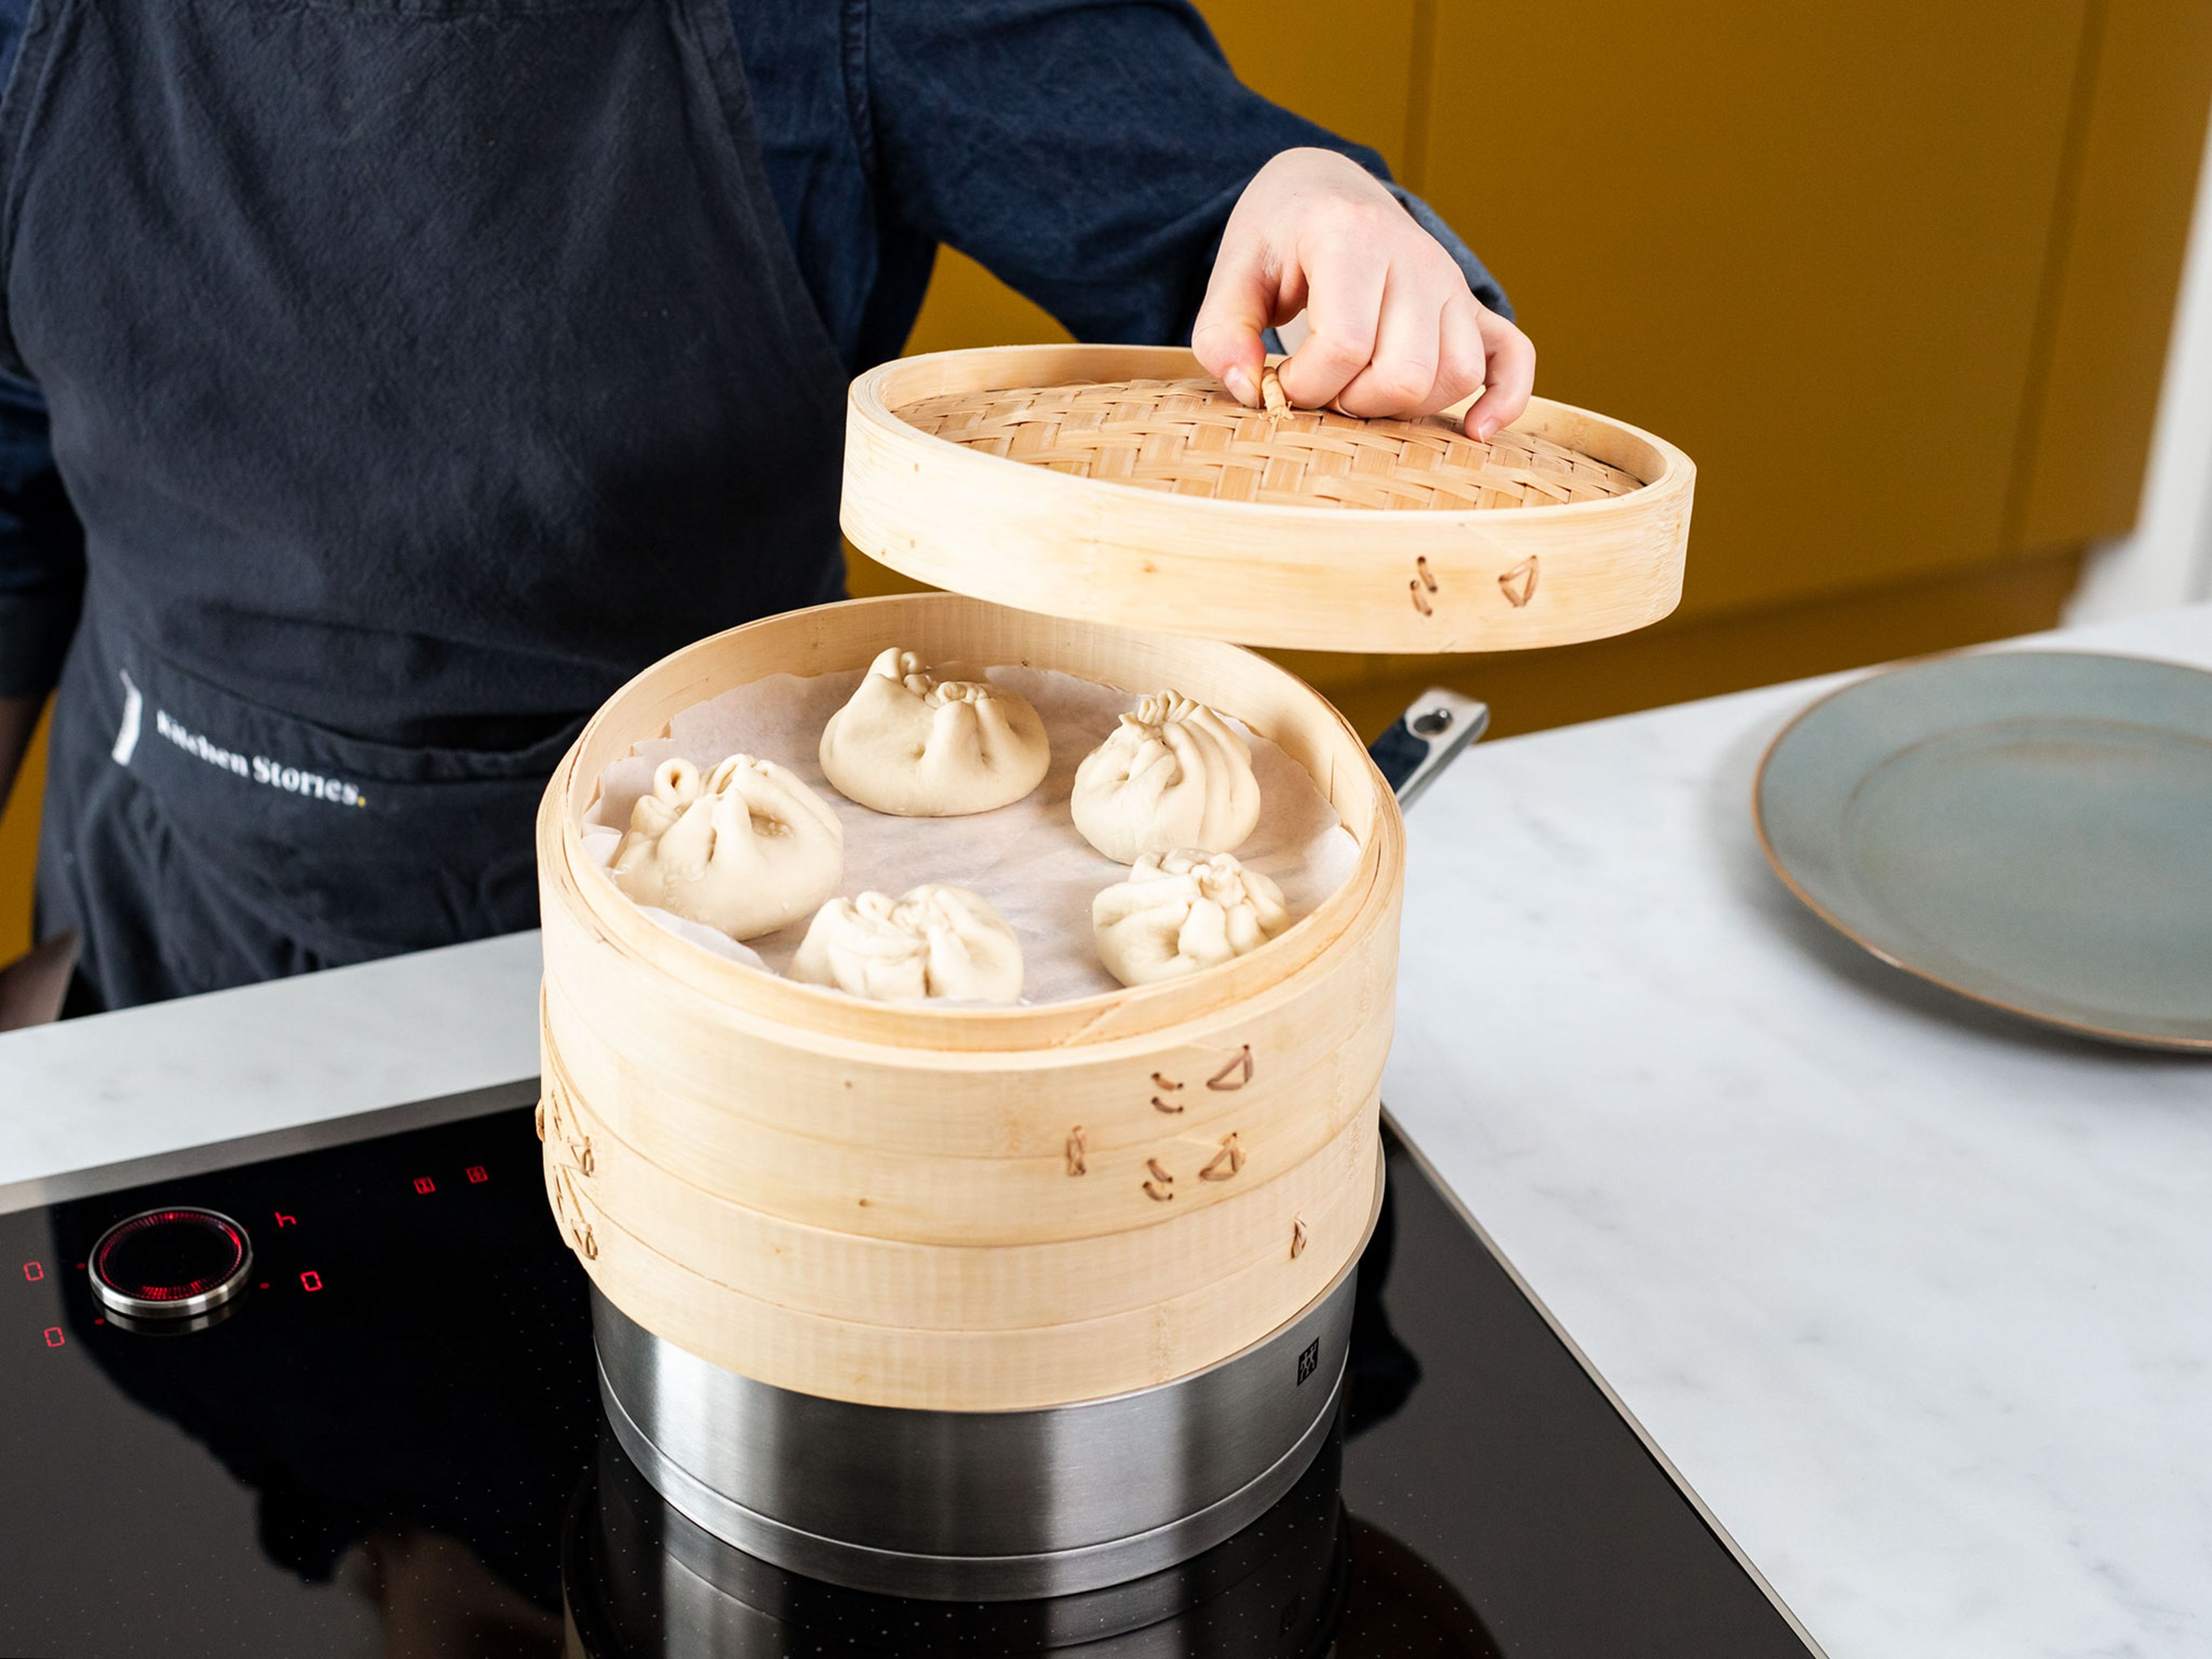 Set up a bamboo steamer lined with parchment paper over a pan of simmering water. Add bao buns to steamer and steam for approx. 12 min. over medium-low heat. Turn off heat and let bao buns sit in the steamer for another 5 min. Garnish with scallions and serve with sweet soy sauce. Enjoy!